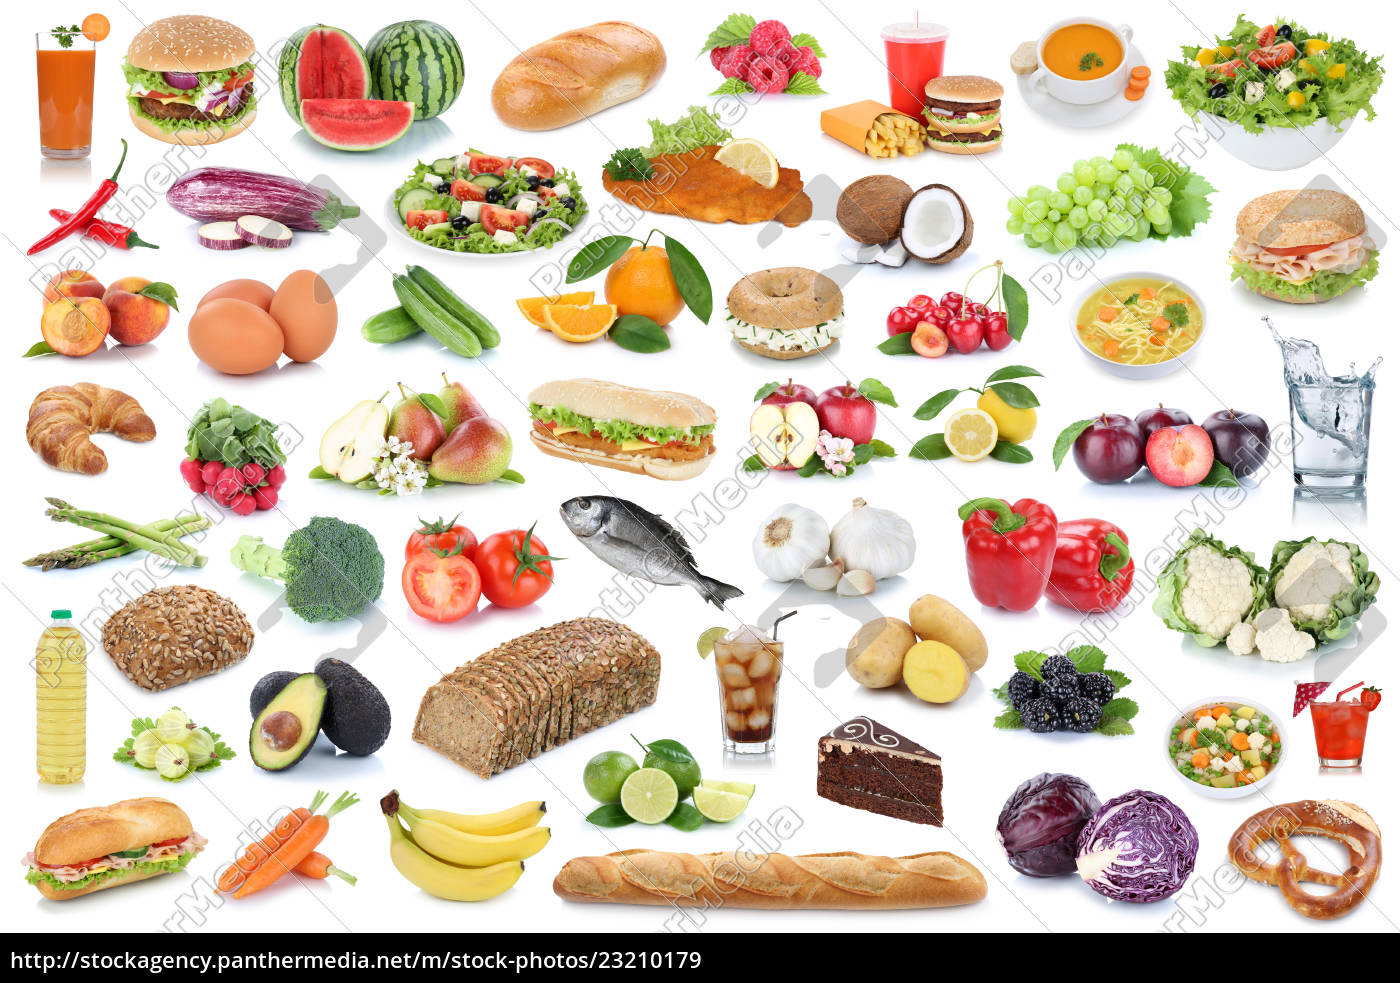 Stock Photo 23210179 - Food Collage Healthy Food Fruits And Vegetables  Fruits